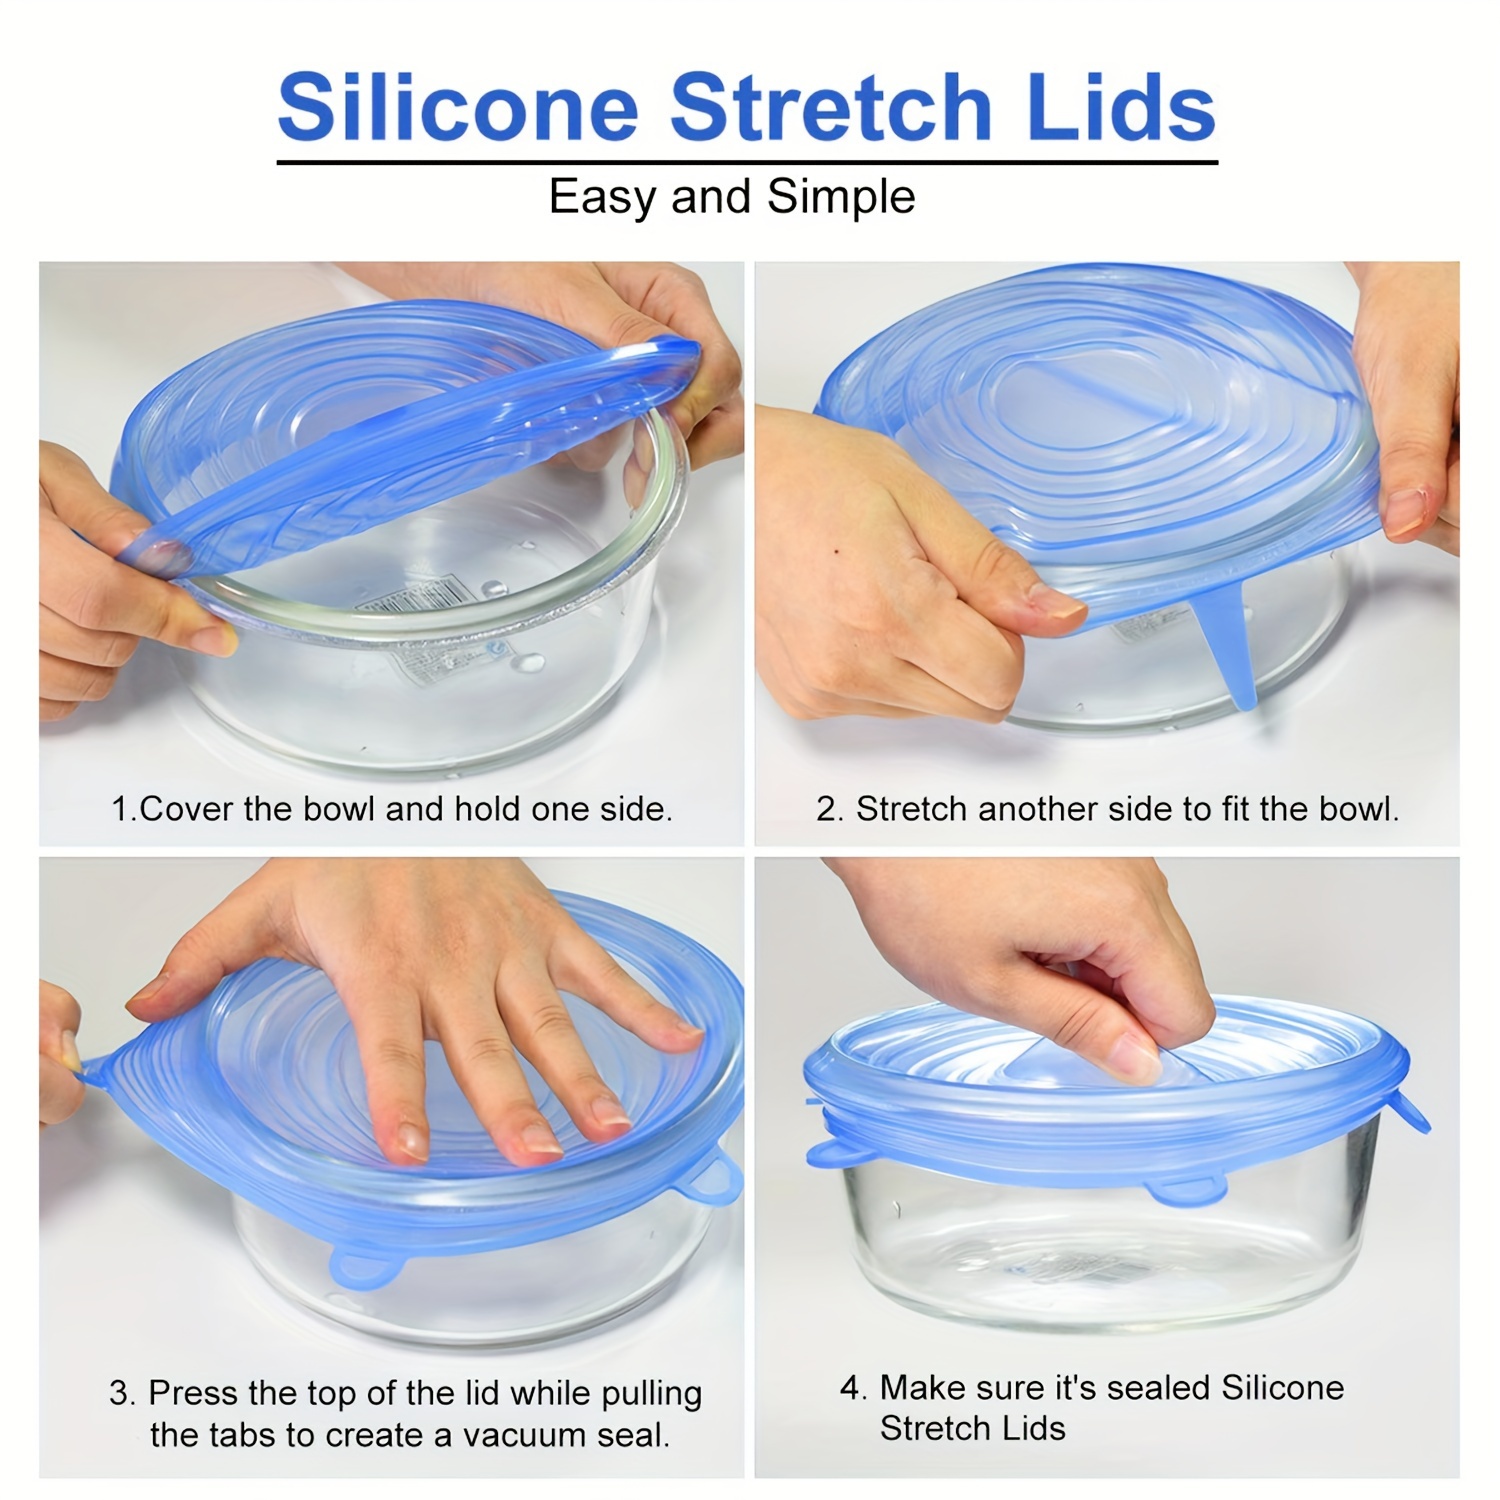 4Pcs Food Storage Covers Silicone Lids Covers Microwave Cover